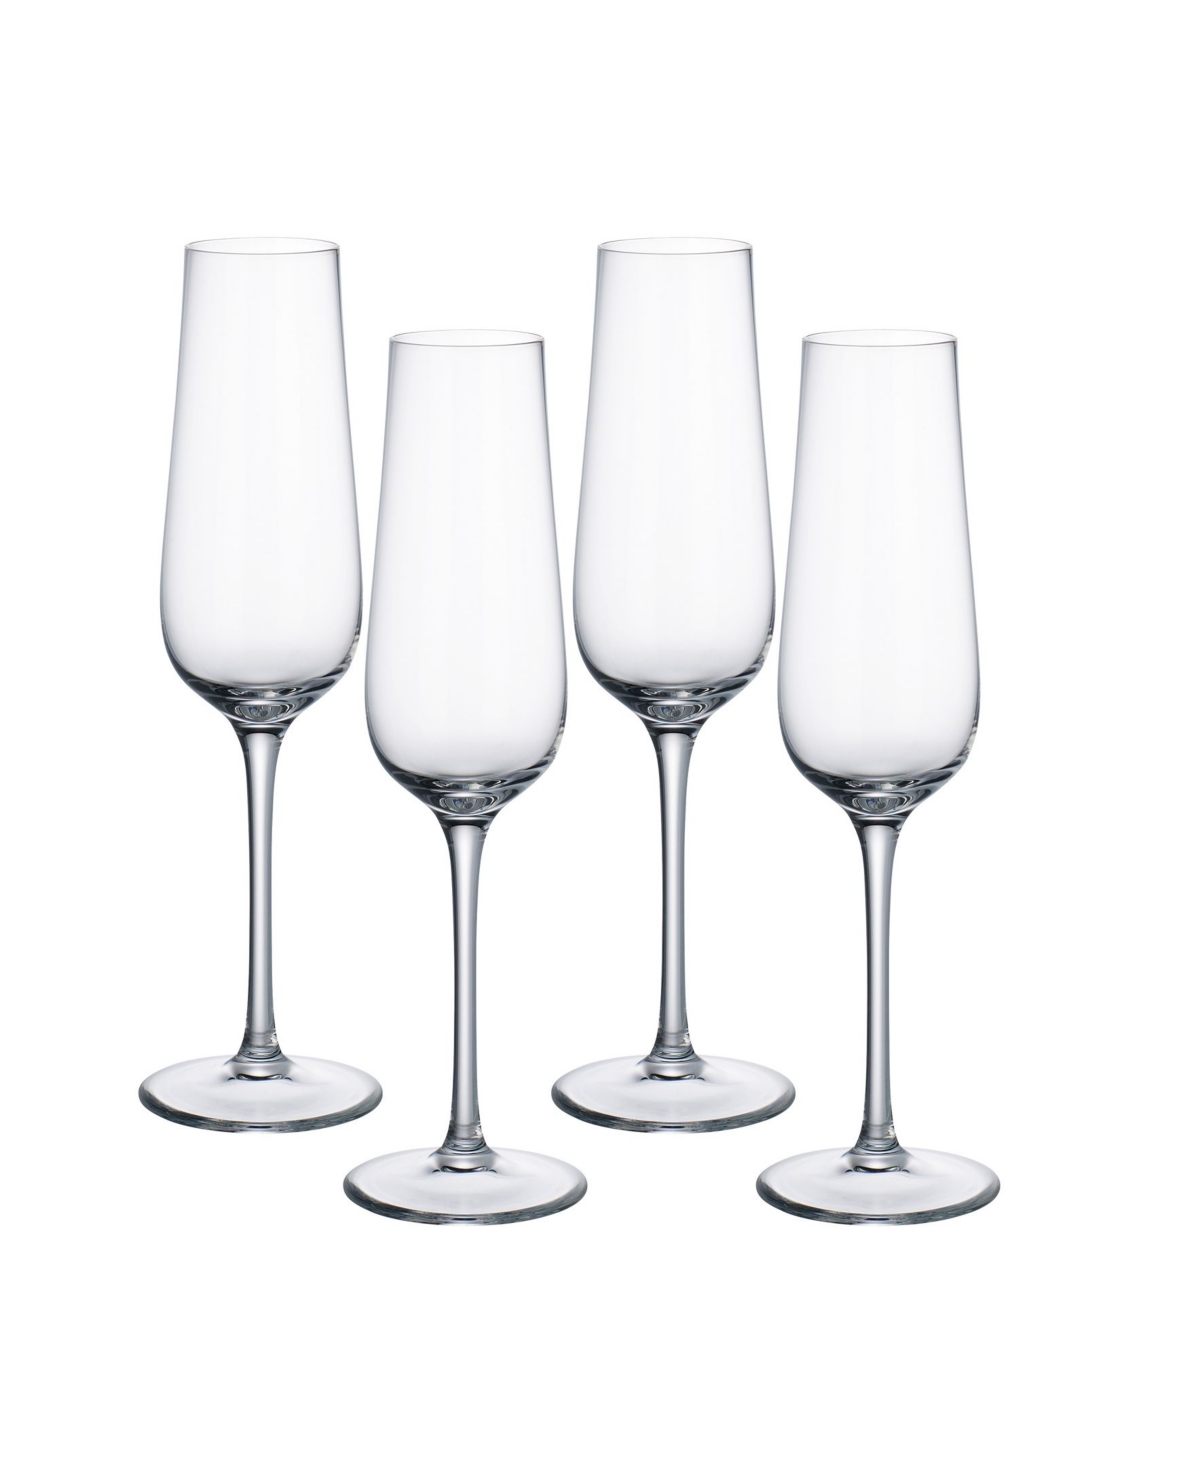 1035785 Villeroy & Boch Purismo Special Champagne Glass, S sku 1035785